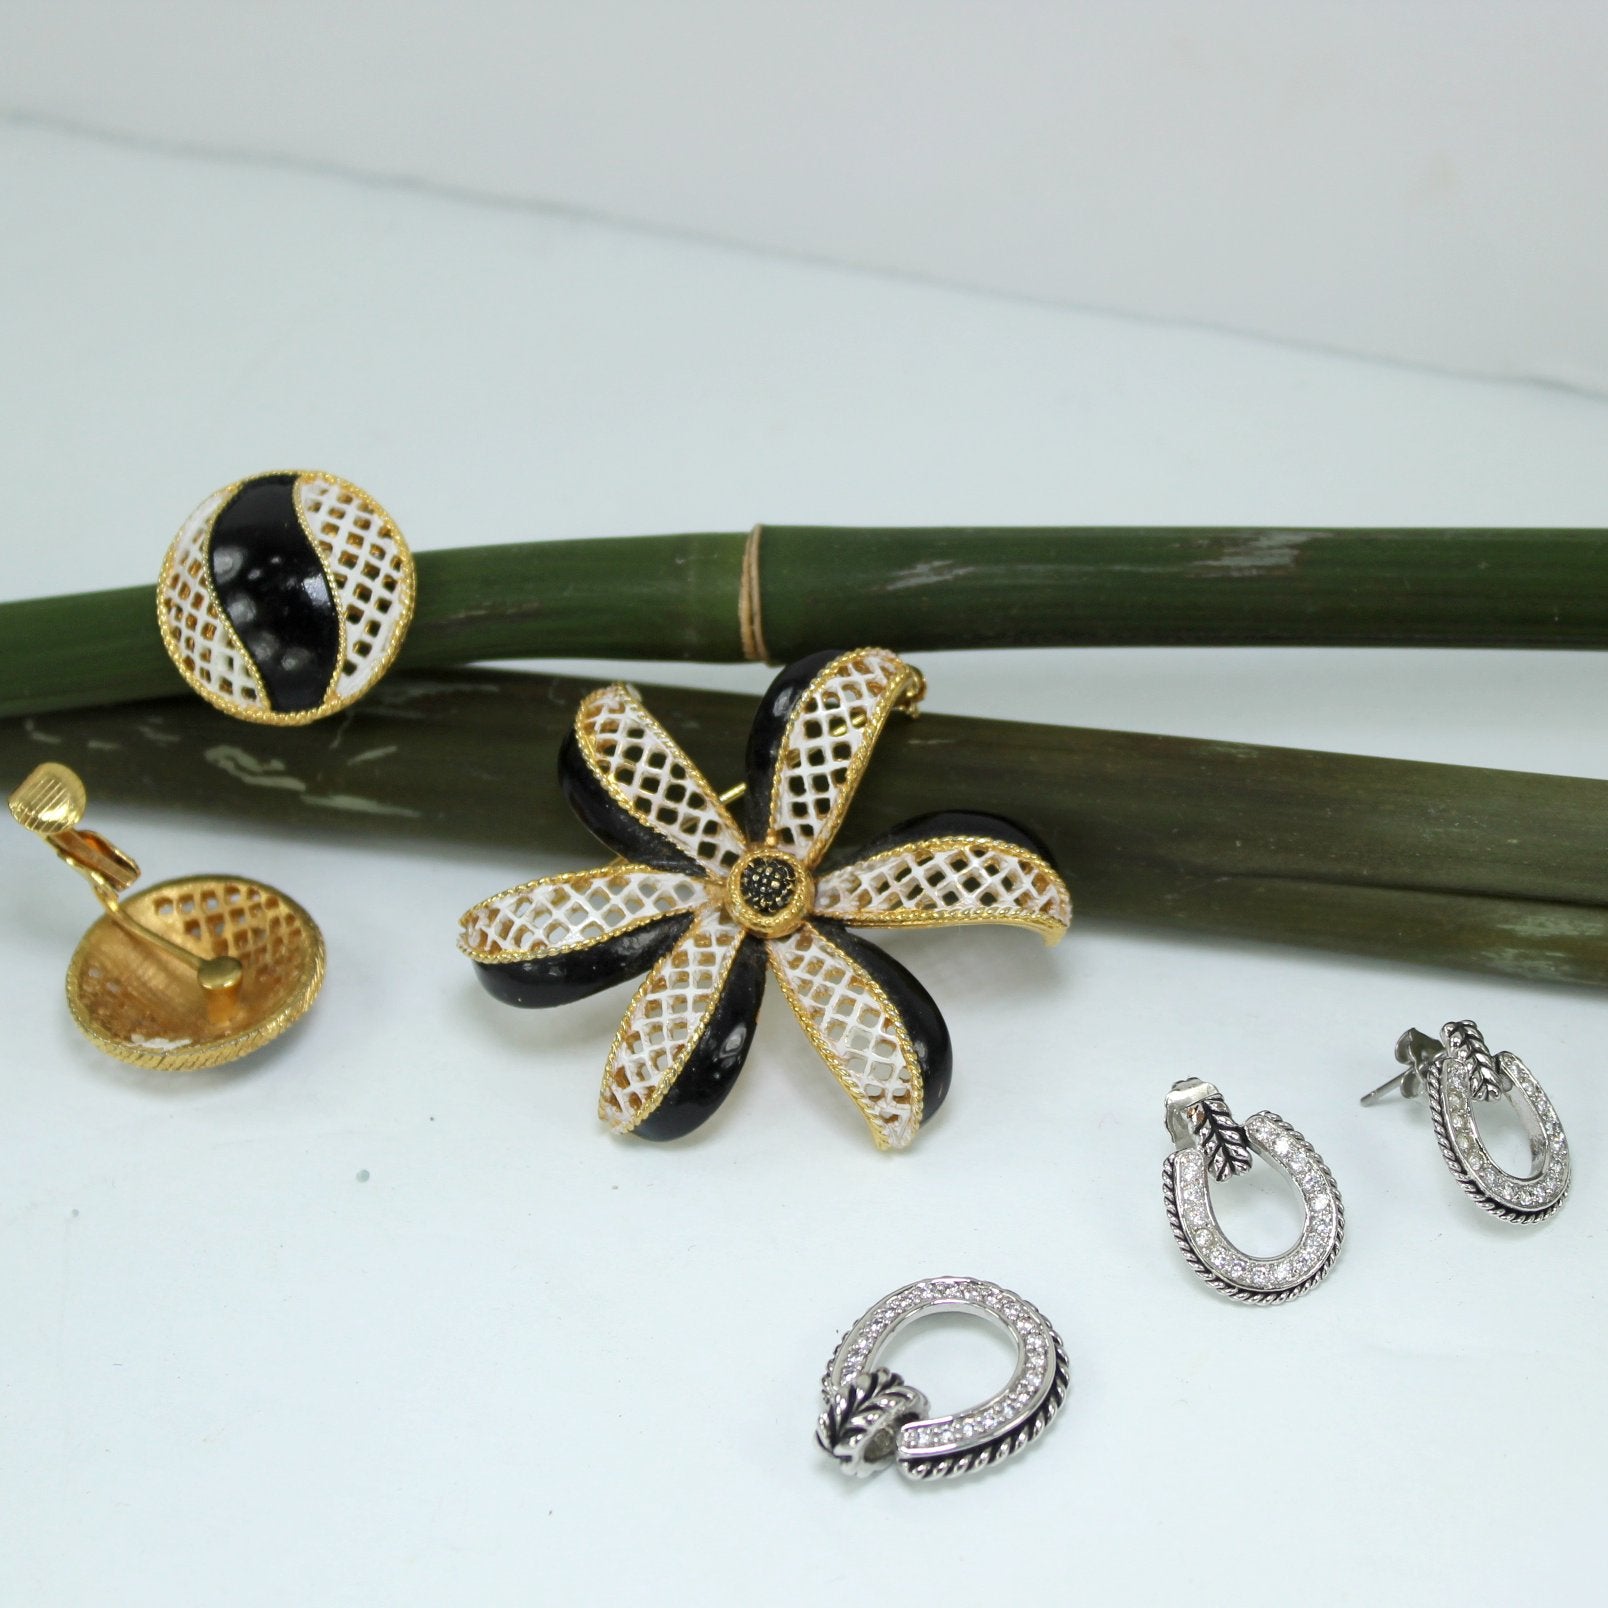 Collection Vintage Jewelry 2 Demi Parure 11 Pins Estate Wearables Bow Pearls RS 2 sets parures